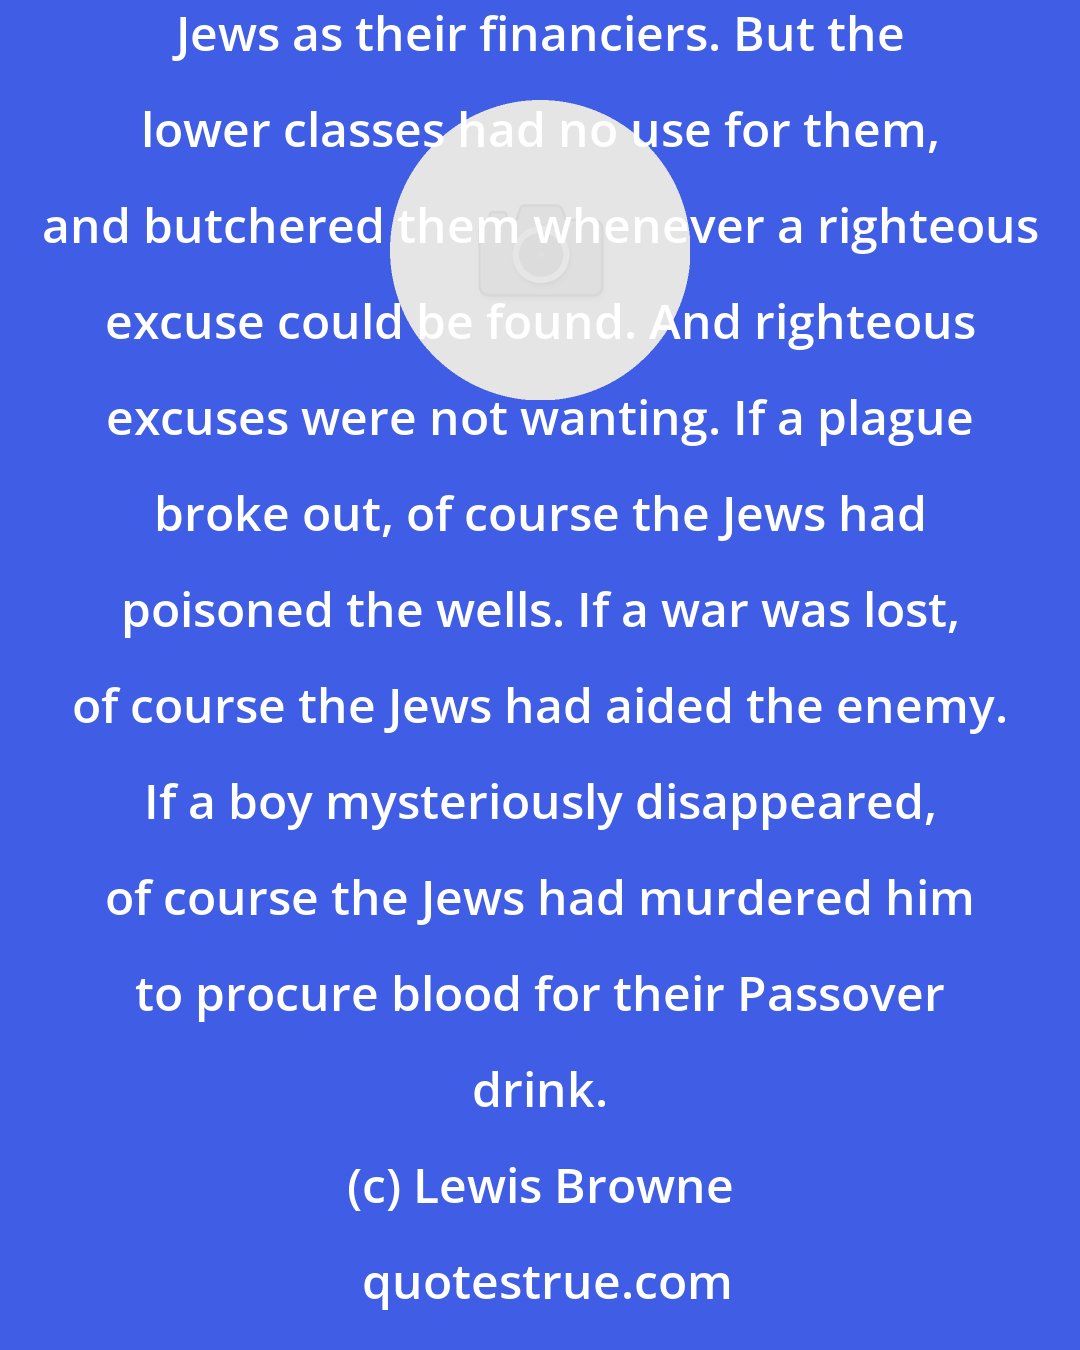 Lewis Browne: Those other lands were Christian, and they boiled with bigotry. The rulers themselves were more or less tolerant, for they depended upon Jews as their financiers. But the lower classes had no use for them, and butchered them whenever a righteous excuse could be found. And righteous excuses were not wanting. If a plague broke out, of course the Jews had poisoned the wells. If a war was lost, of course the Jews had aided the enemy. If a boy mysteriously disappeared, of course the Jews had murdered him to procure blood for their Passover drink.